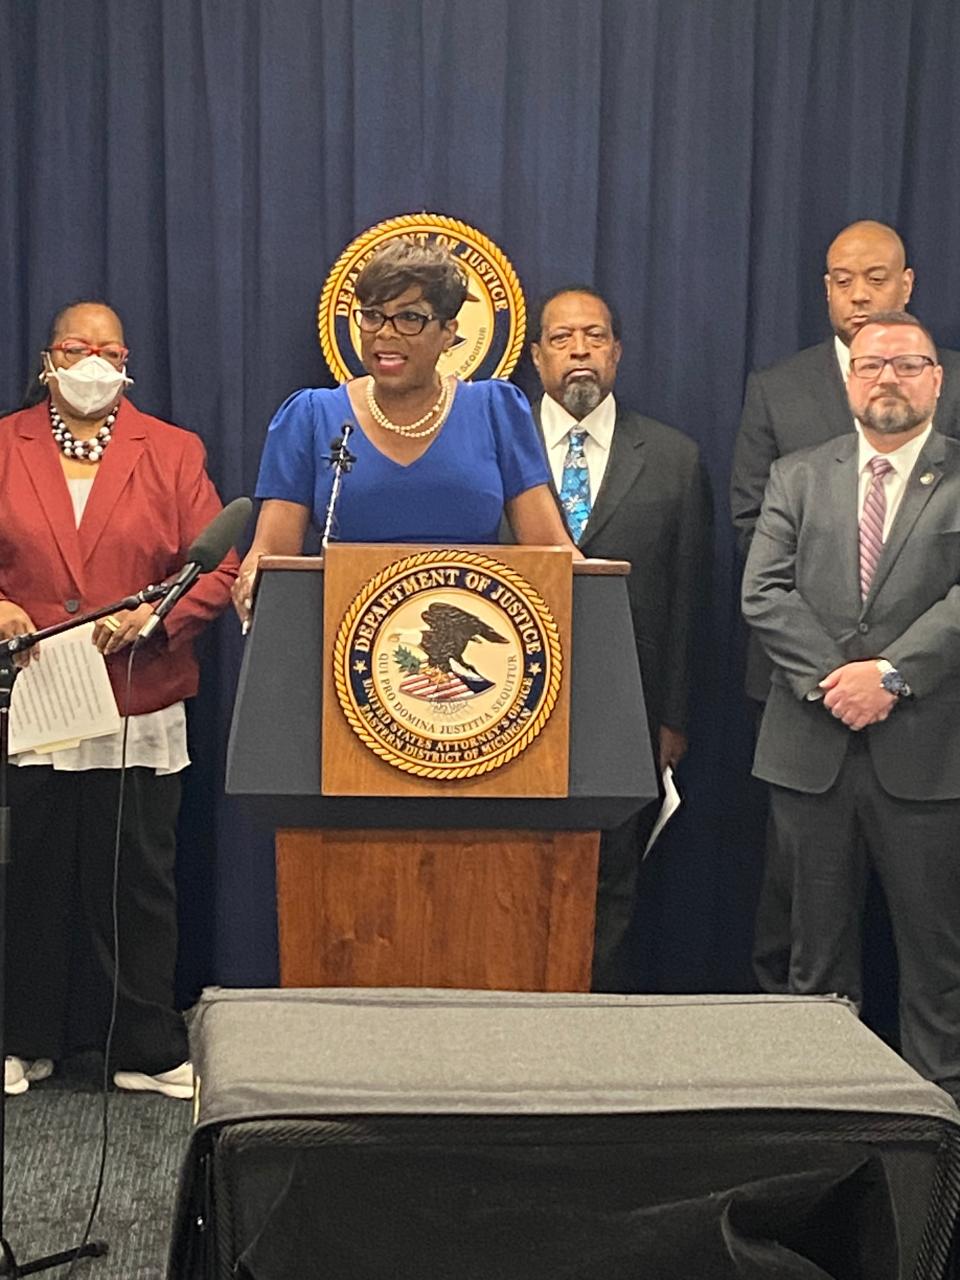 U.S. Attorney Dawn Ison with other metro Detroit law enforcement officials announced a new initiative to combat and prevent violent crime on Wednesday, April 19. The new effort, dubbed "One Detroit," will incorporate lessons learned from a previous effort called "Detroit One."